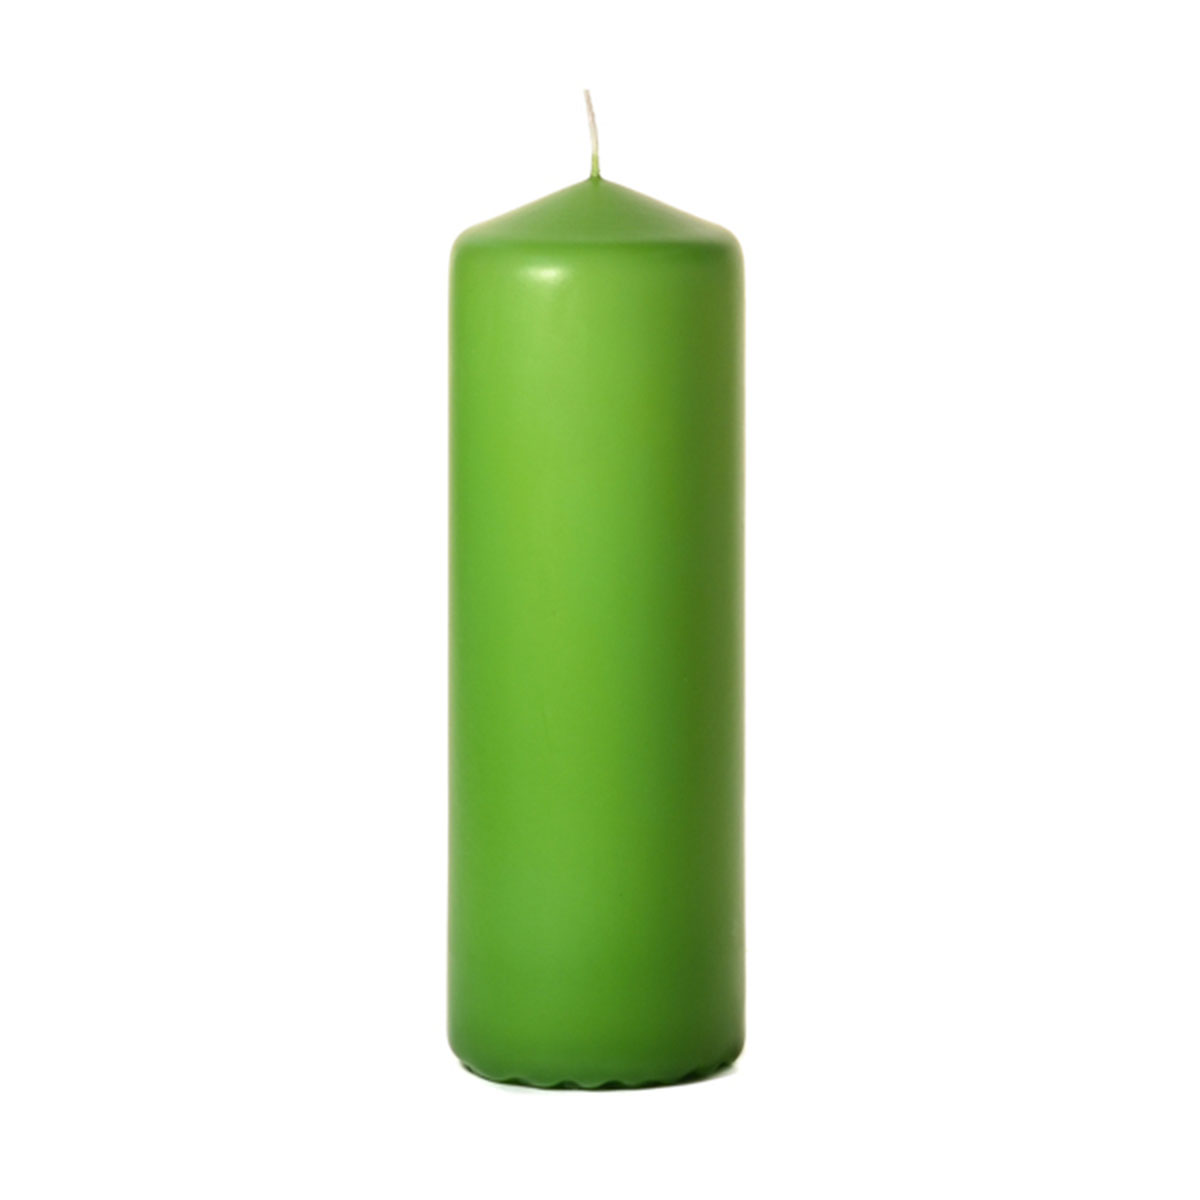 What Do Green Candles Represent